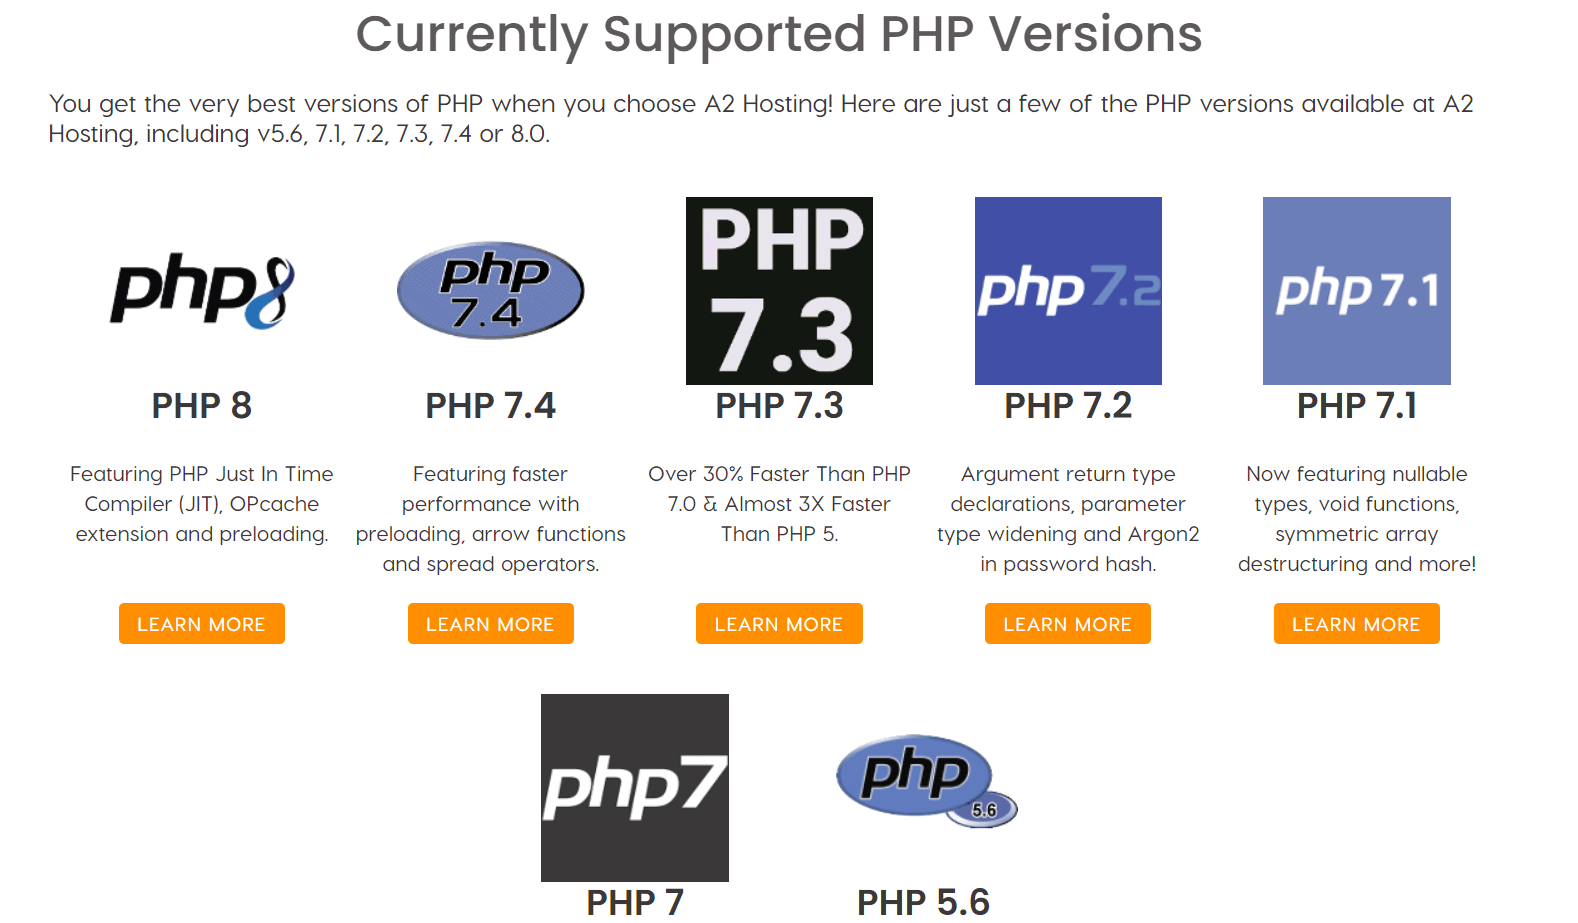 a2-hosting-php-versions